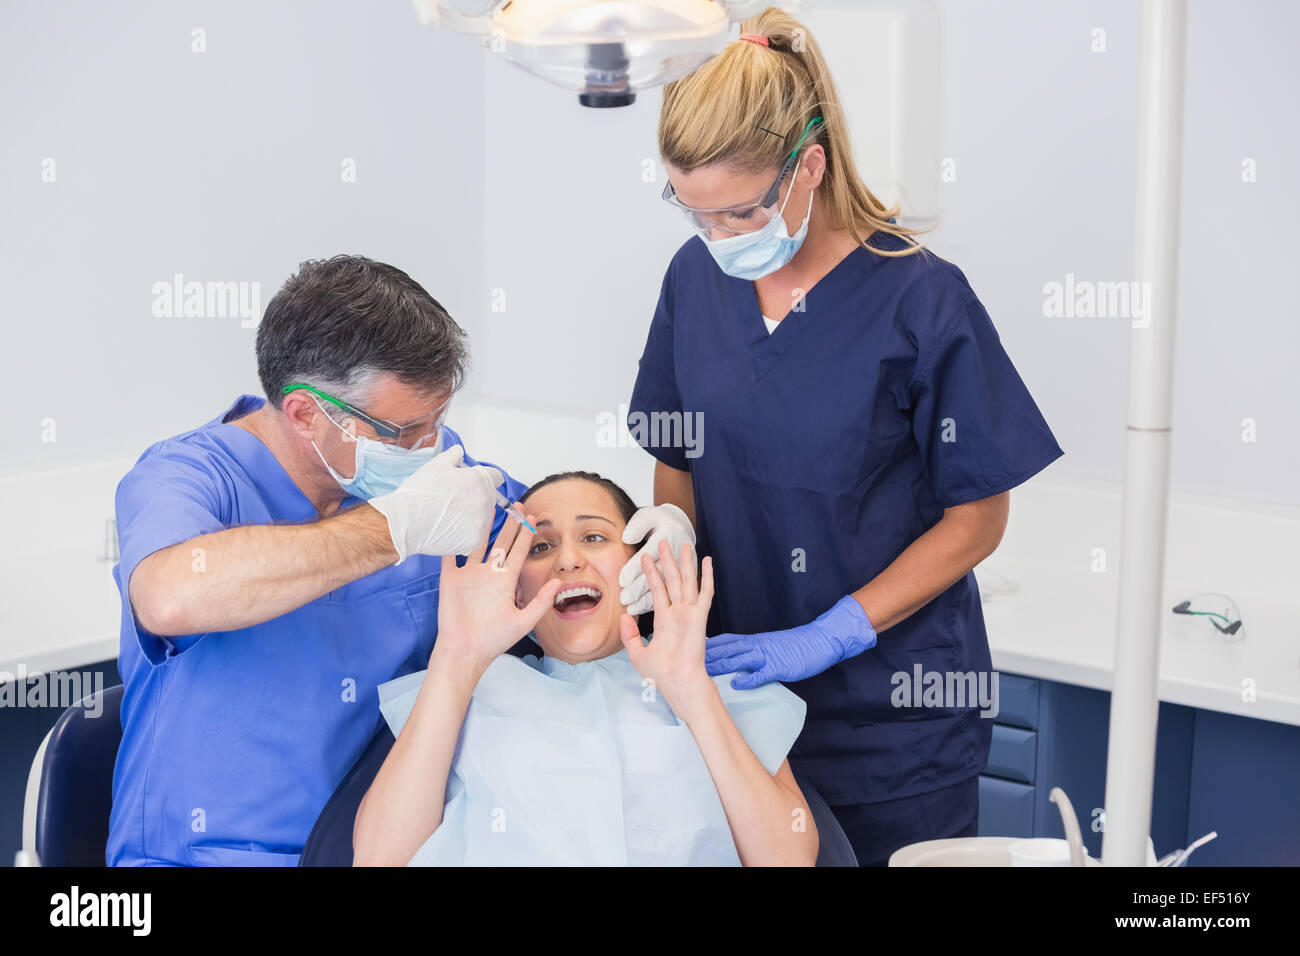 Dentist doing injection and patient protesting Stock Photo